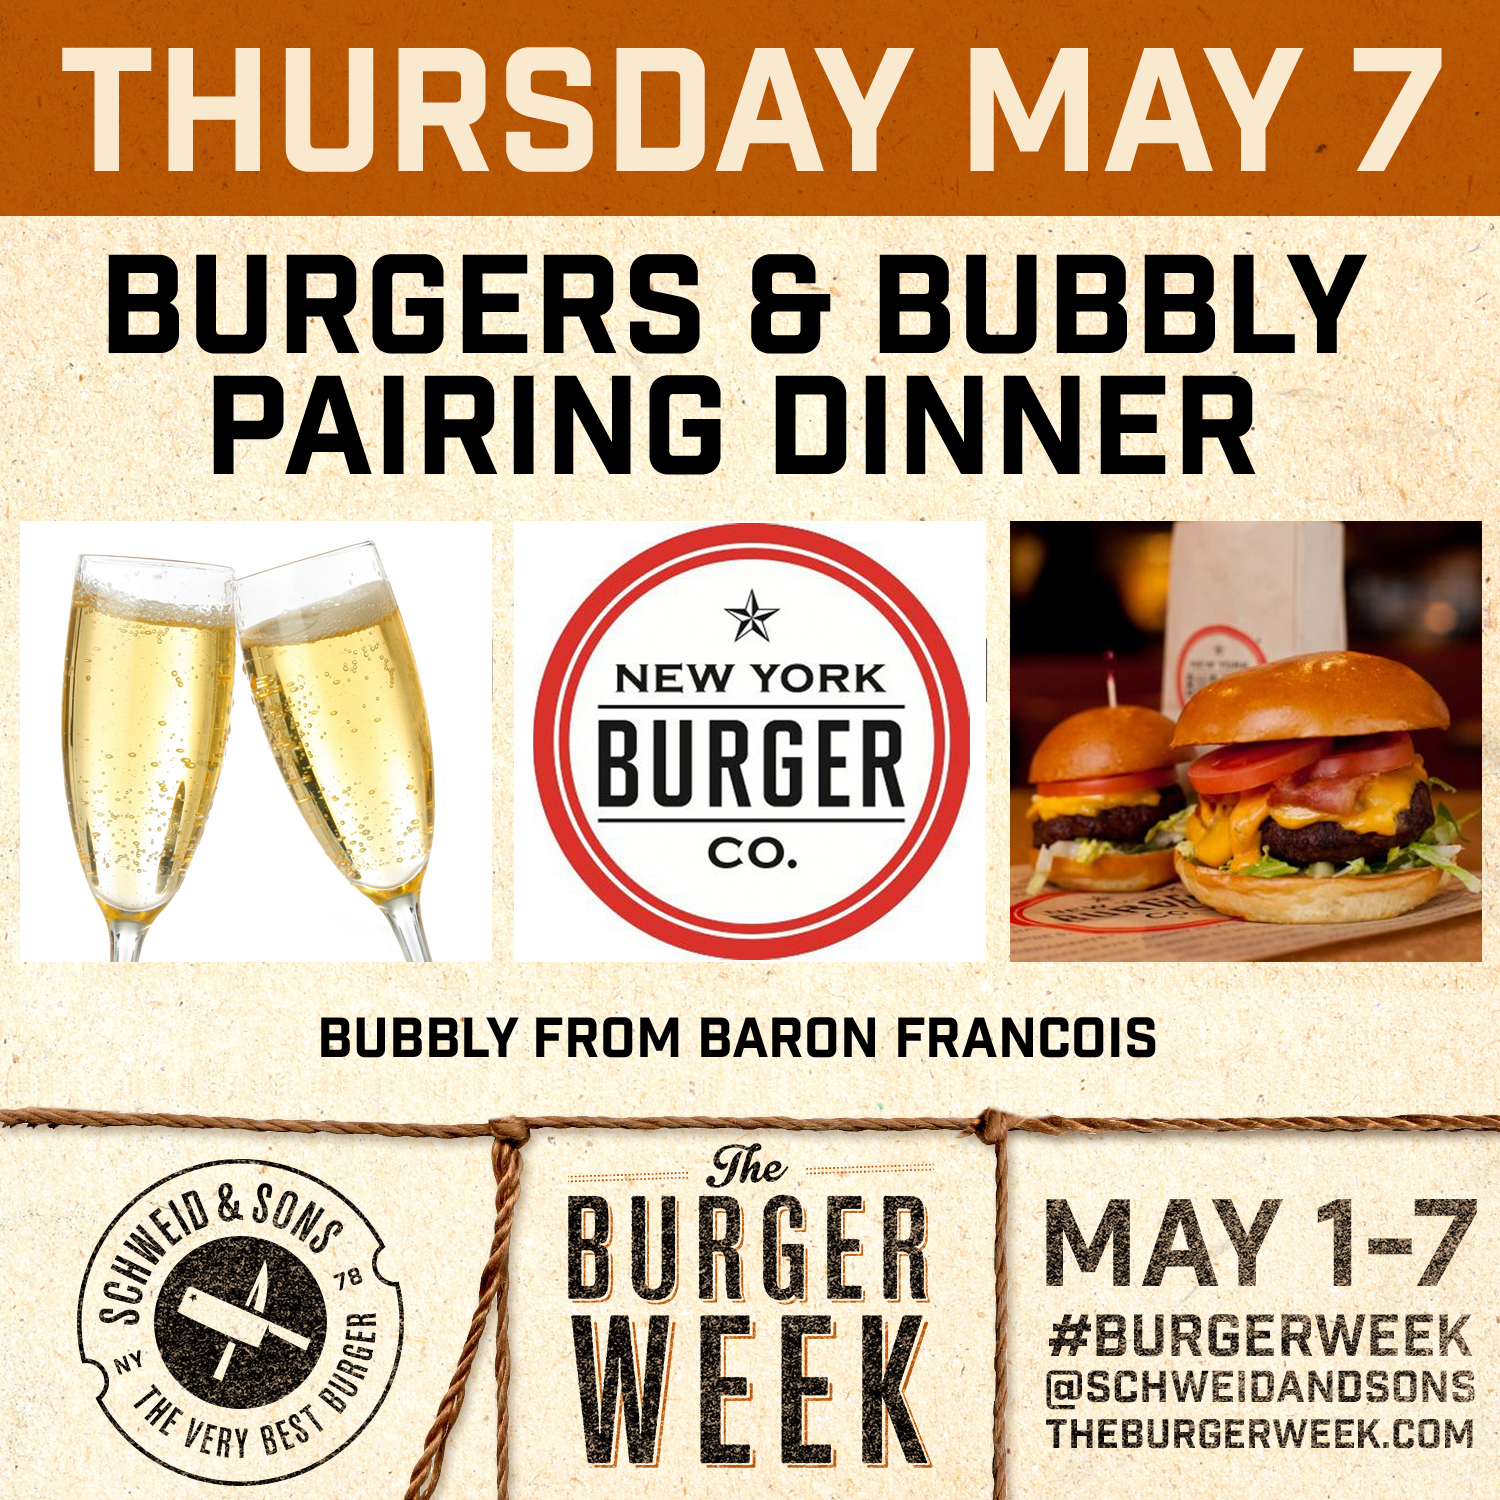 schweid-and-sons-ny-burger-week-2015-Event-Poster-New-York-Burger-Co